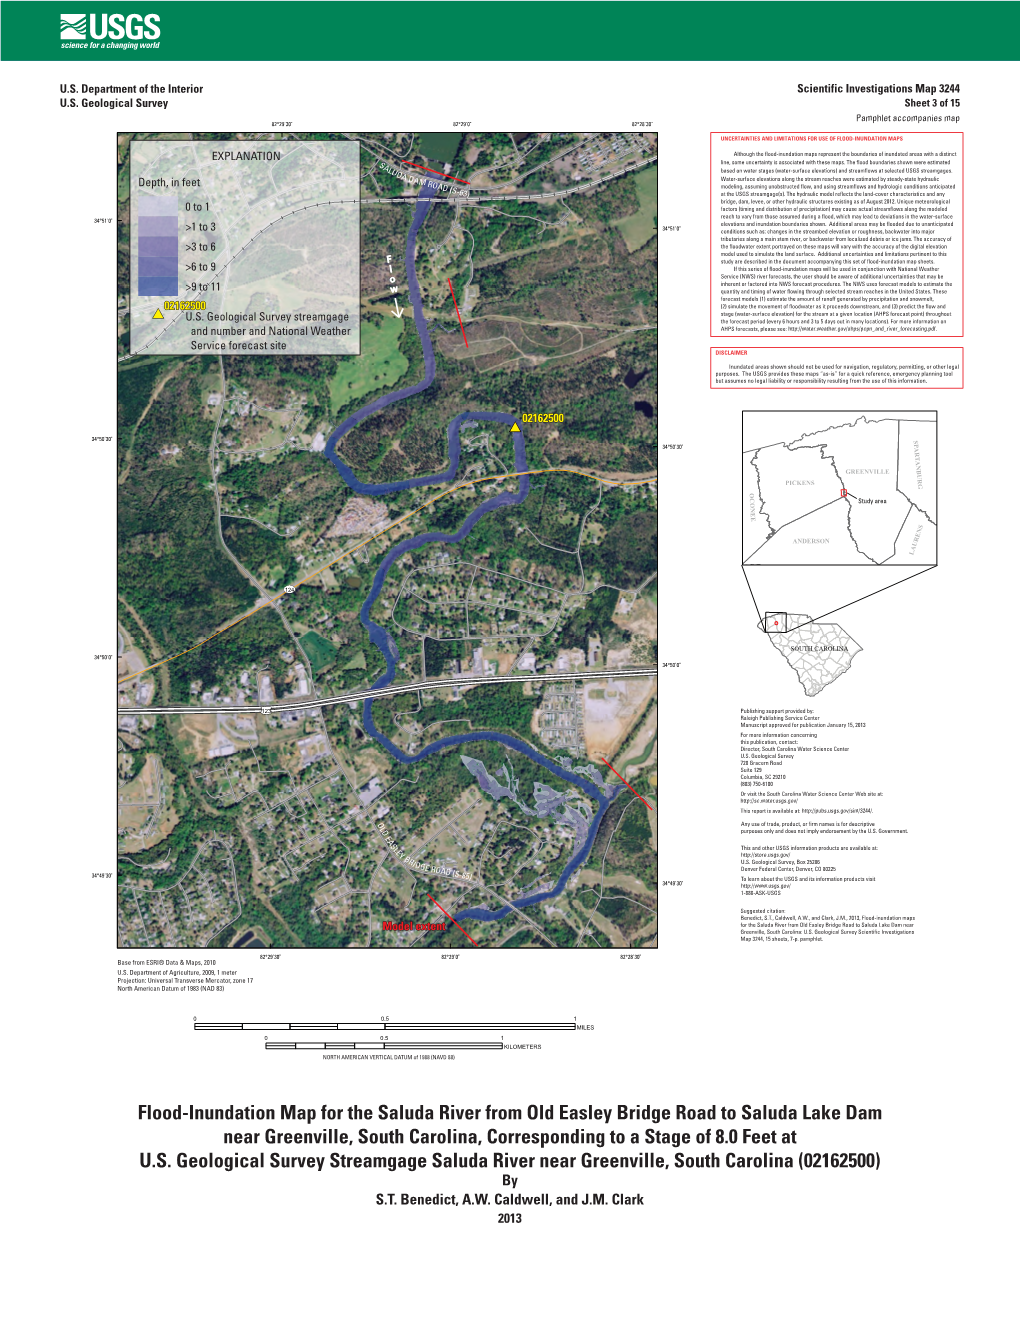 Flood-Inundation Map for the Saluda River from Old Easley Bridge Road to Saluda Lake Dam Near Greenville, South Carolina, Corresponding to a Stage of 8.0 Feet at U.S